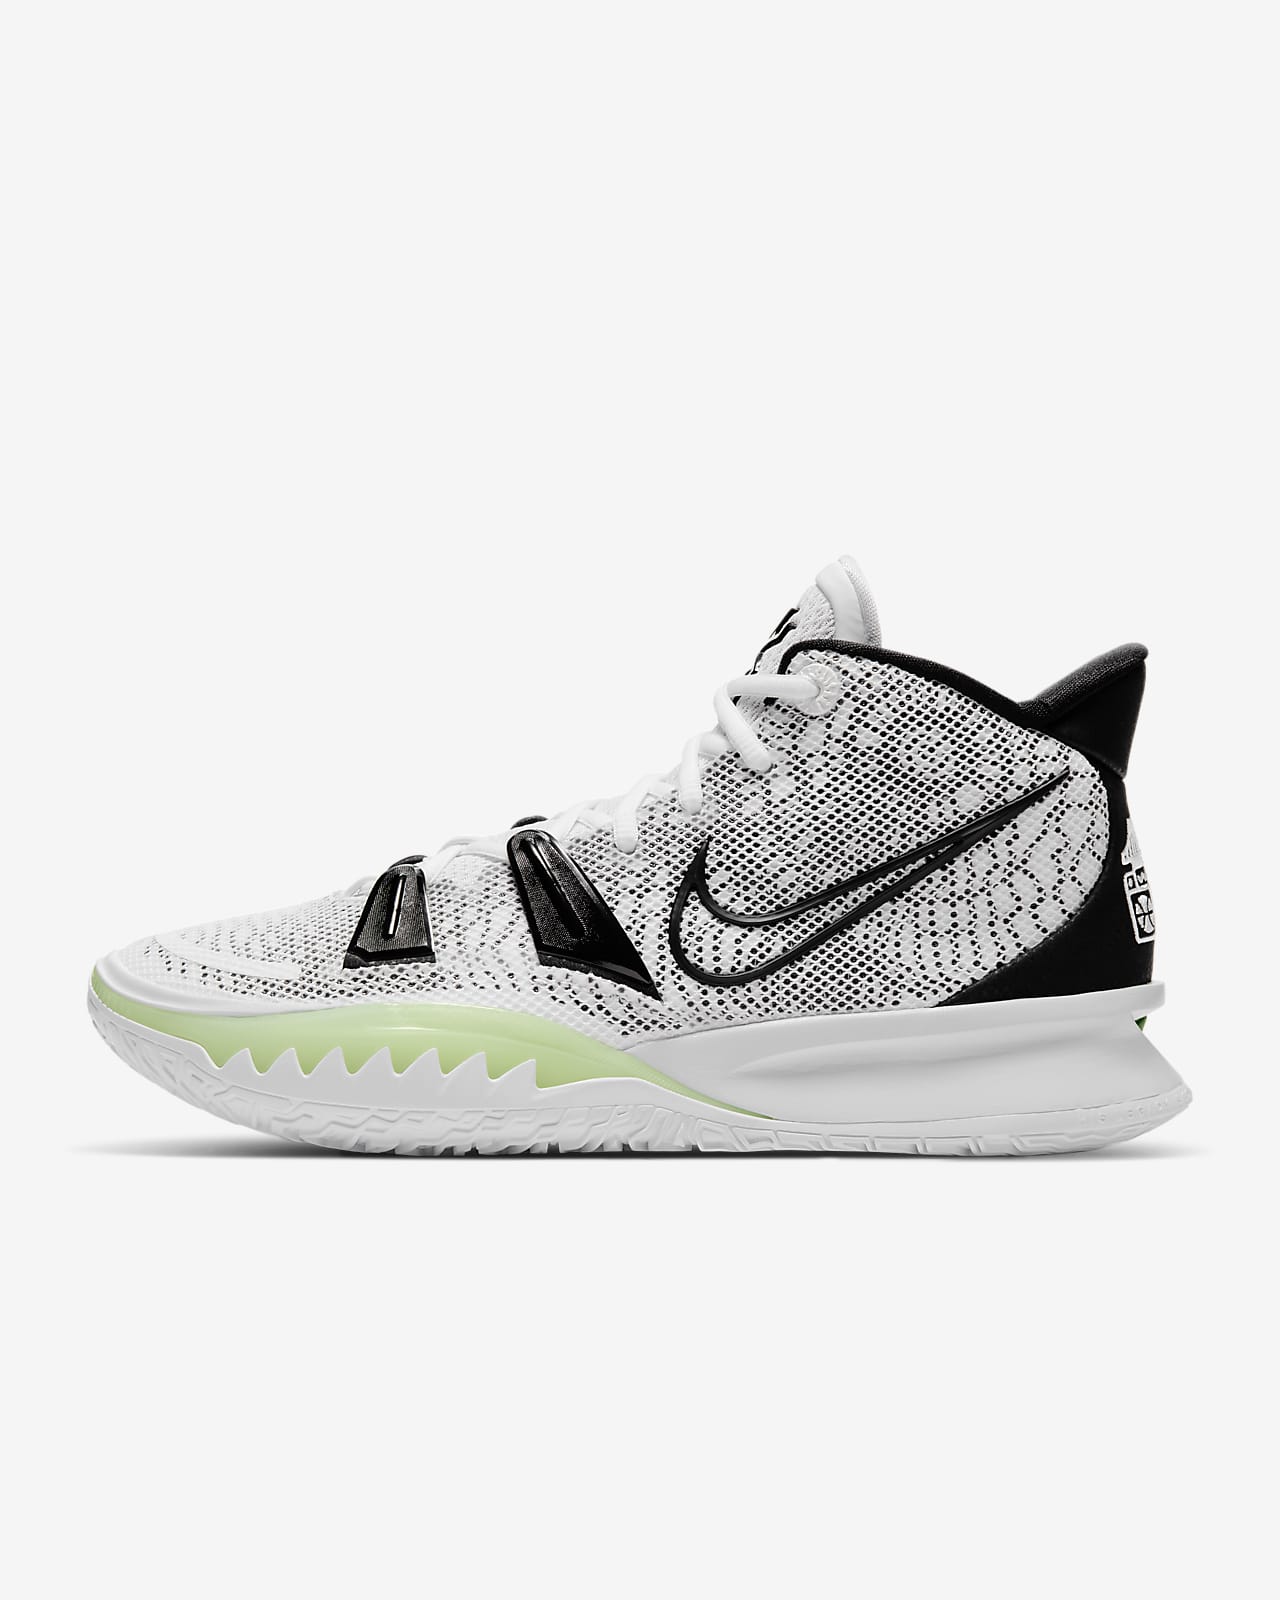 kyrie high top basketball shoes